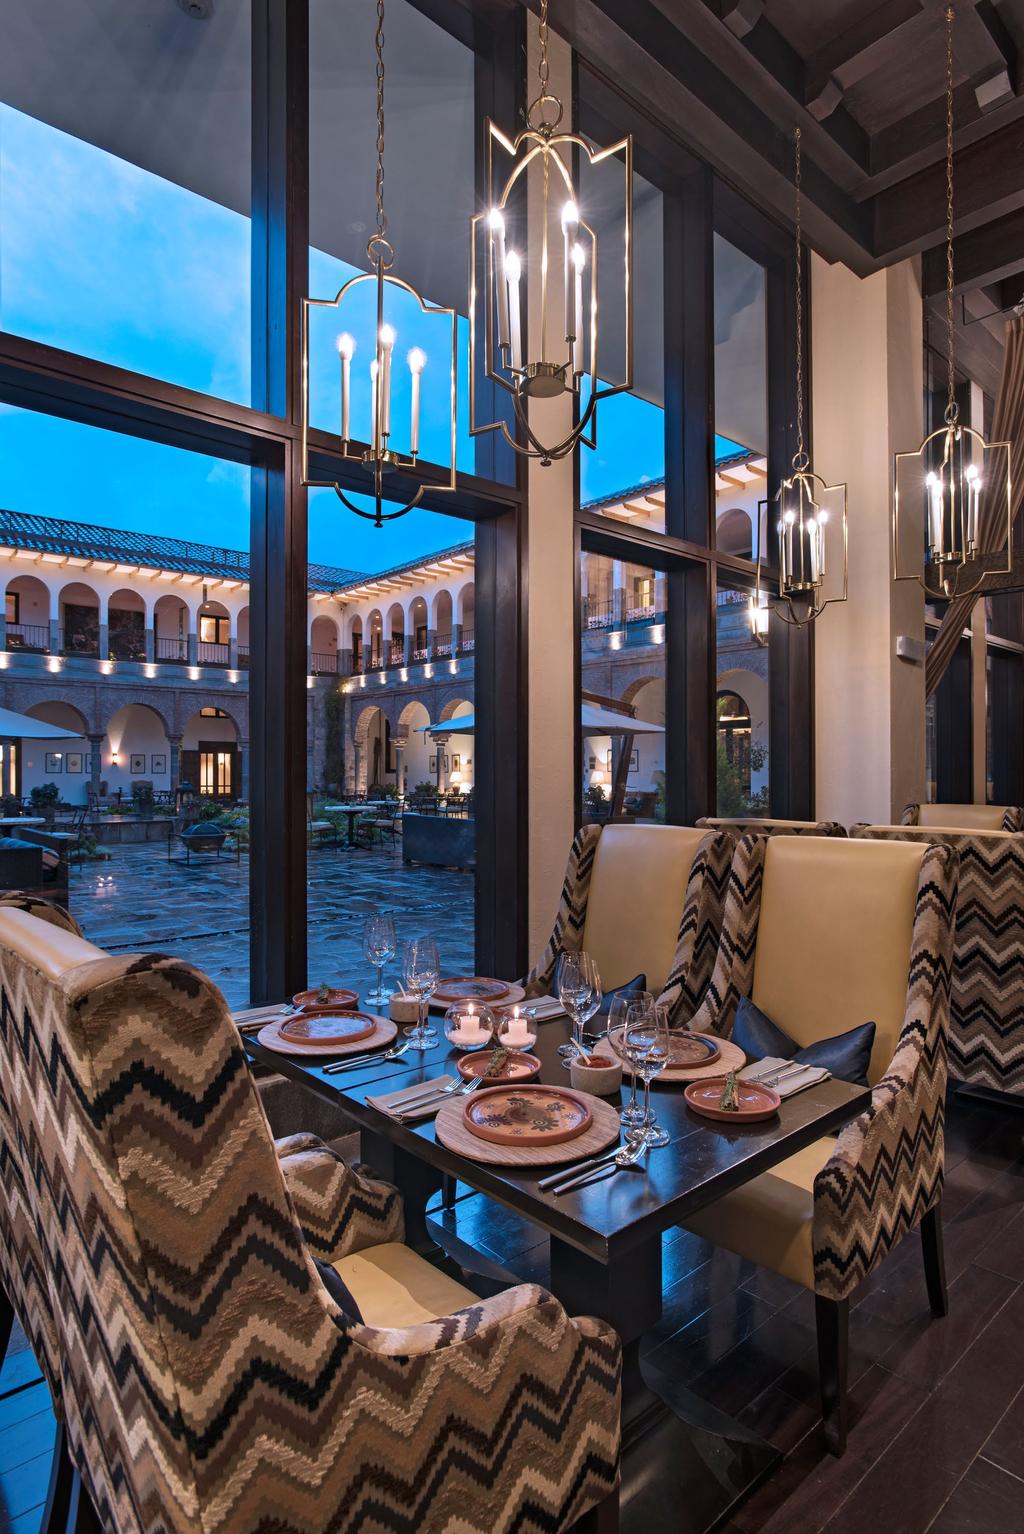 JW Marriott El Convento Cusco Restaurant Qespi Restaurant & Bar Offers gastronomy that fusions the past Andean practices and the modern and innovative